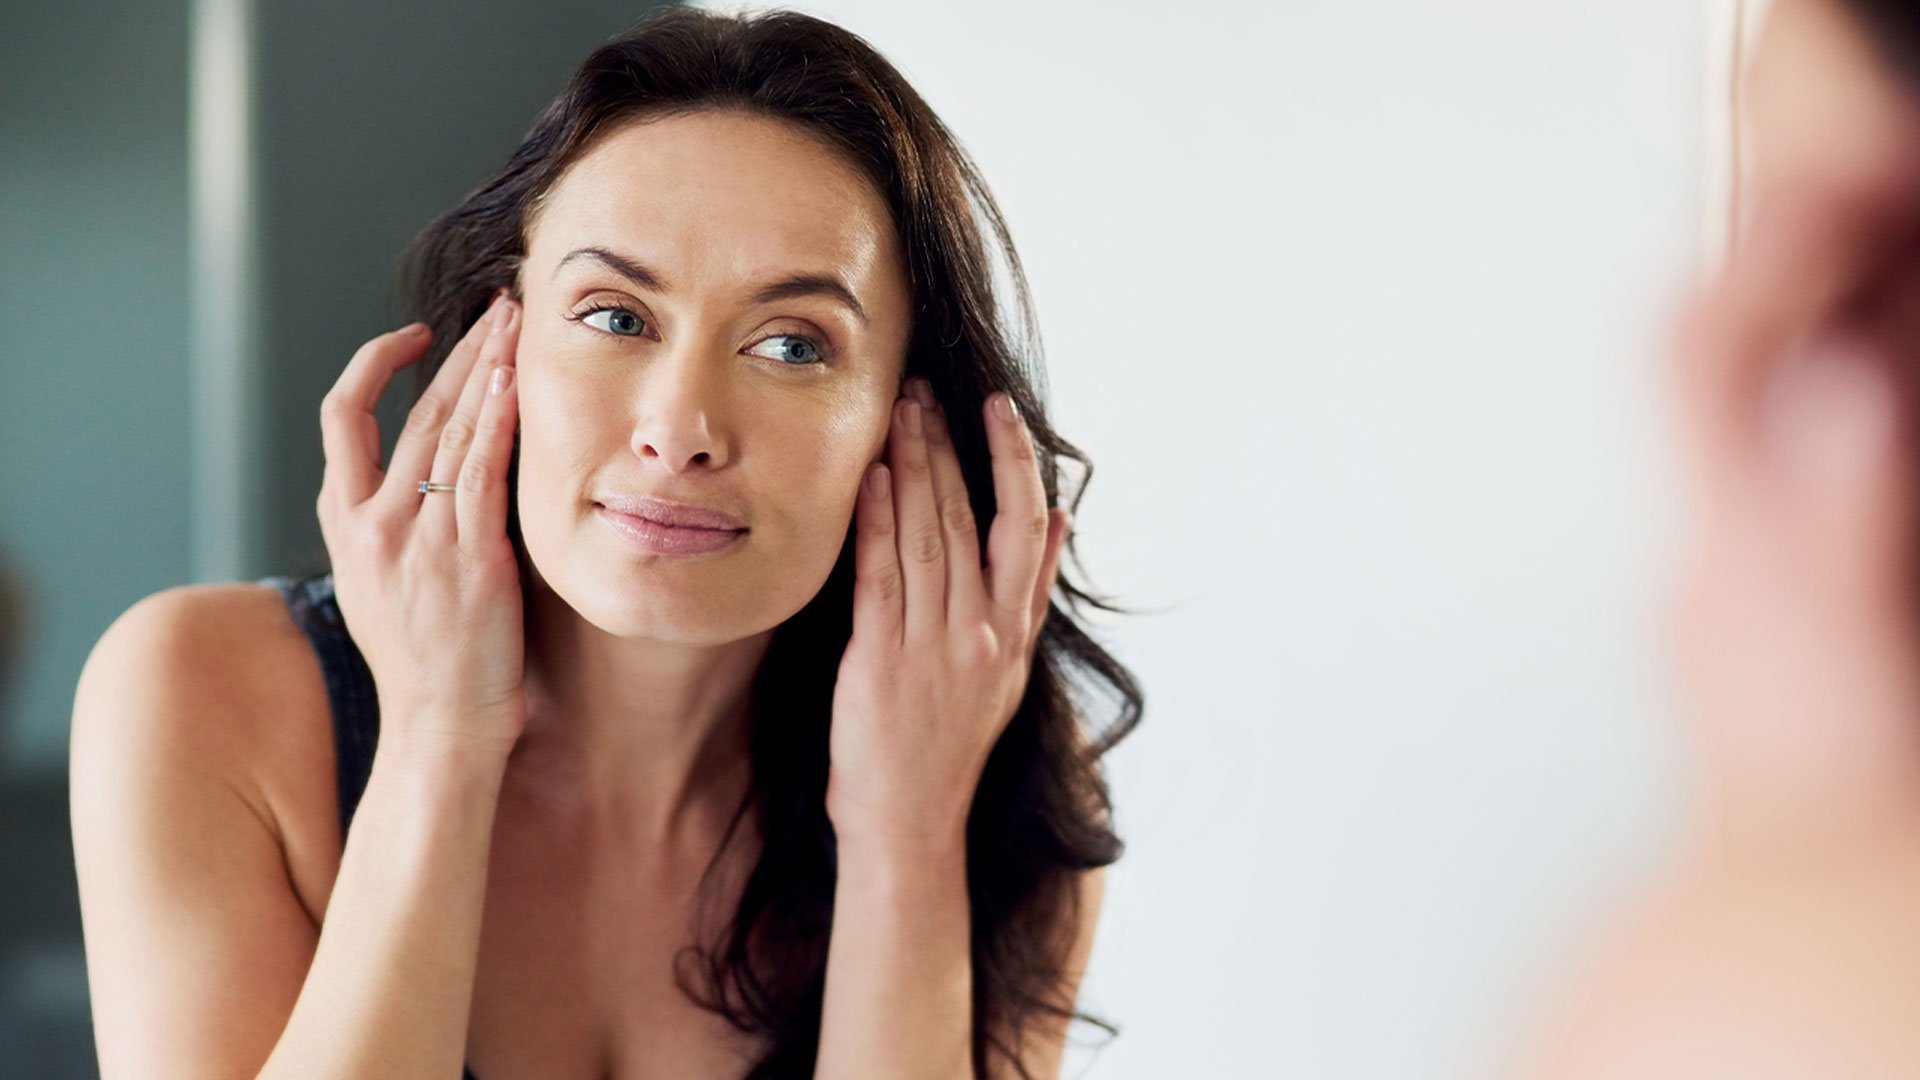 Facial Swelling: How to De-Puff Your Face in The Morning